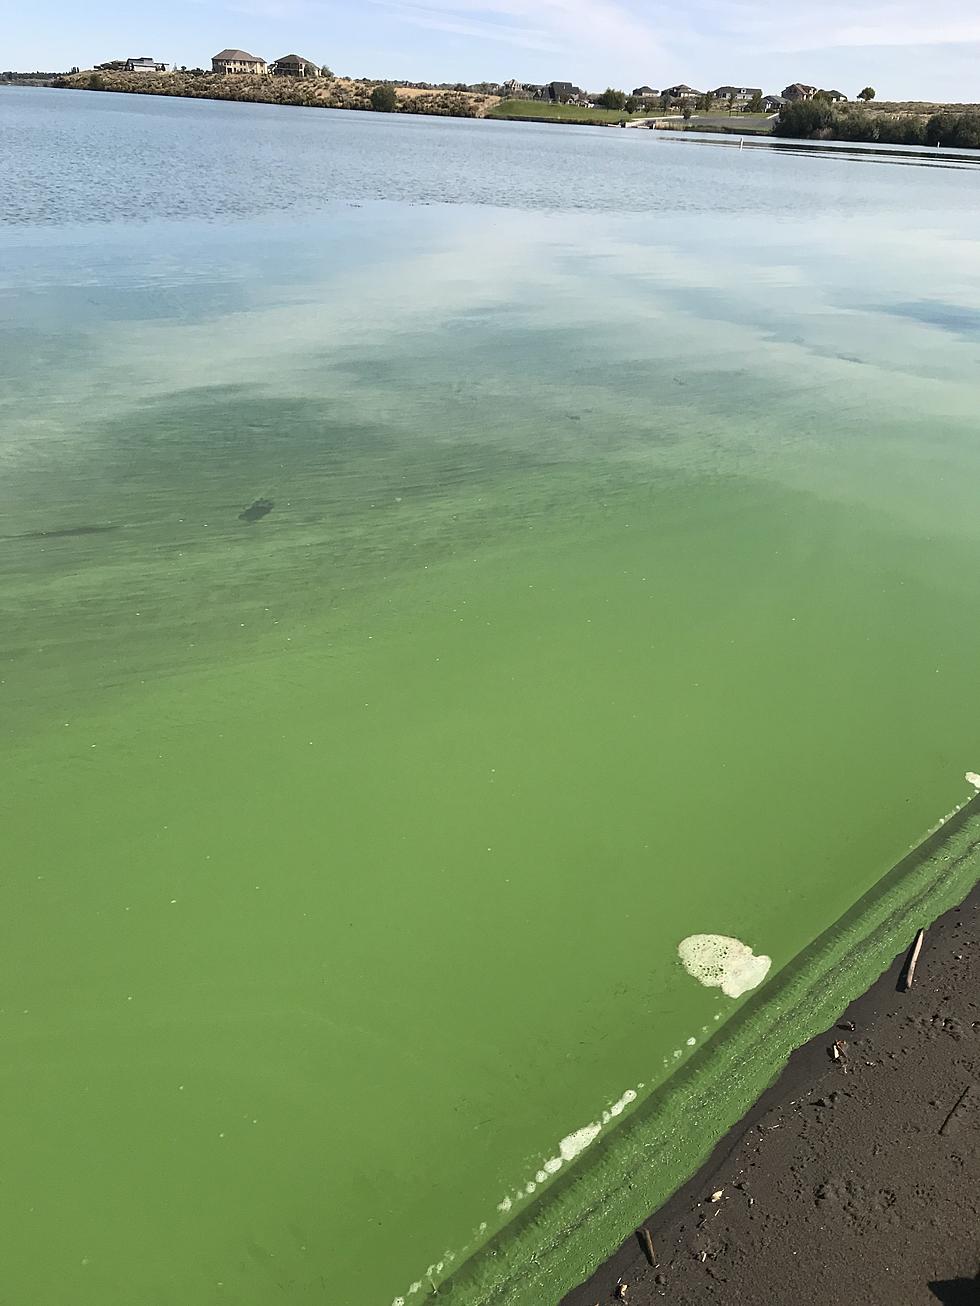 Toxic Algae Found in Lake – Officials Say Stay Away Until Clear